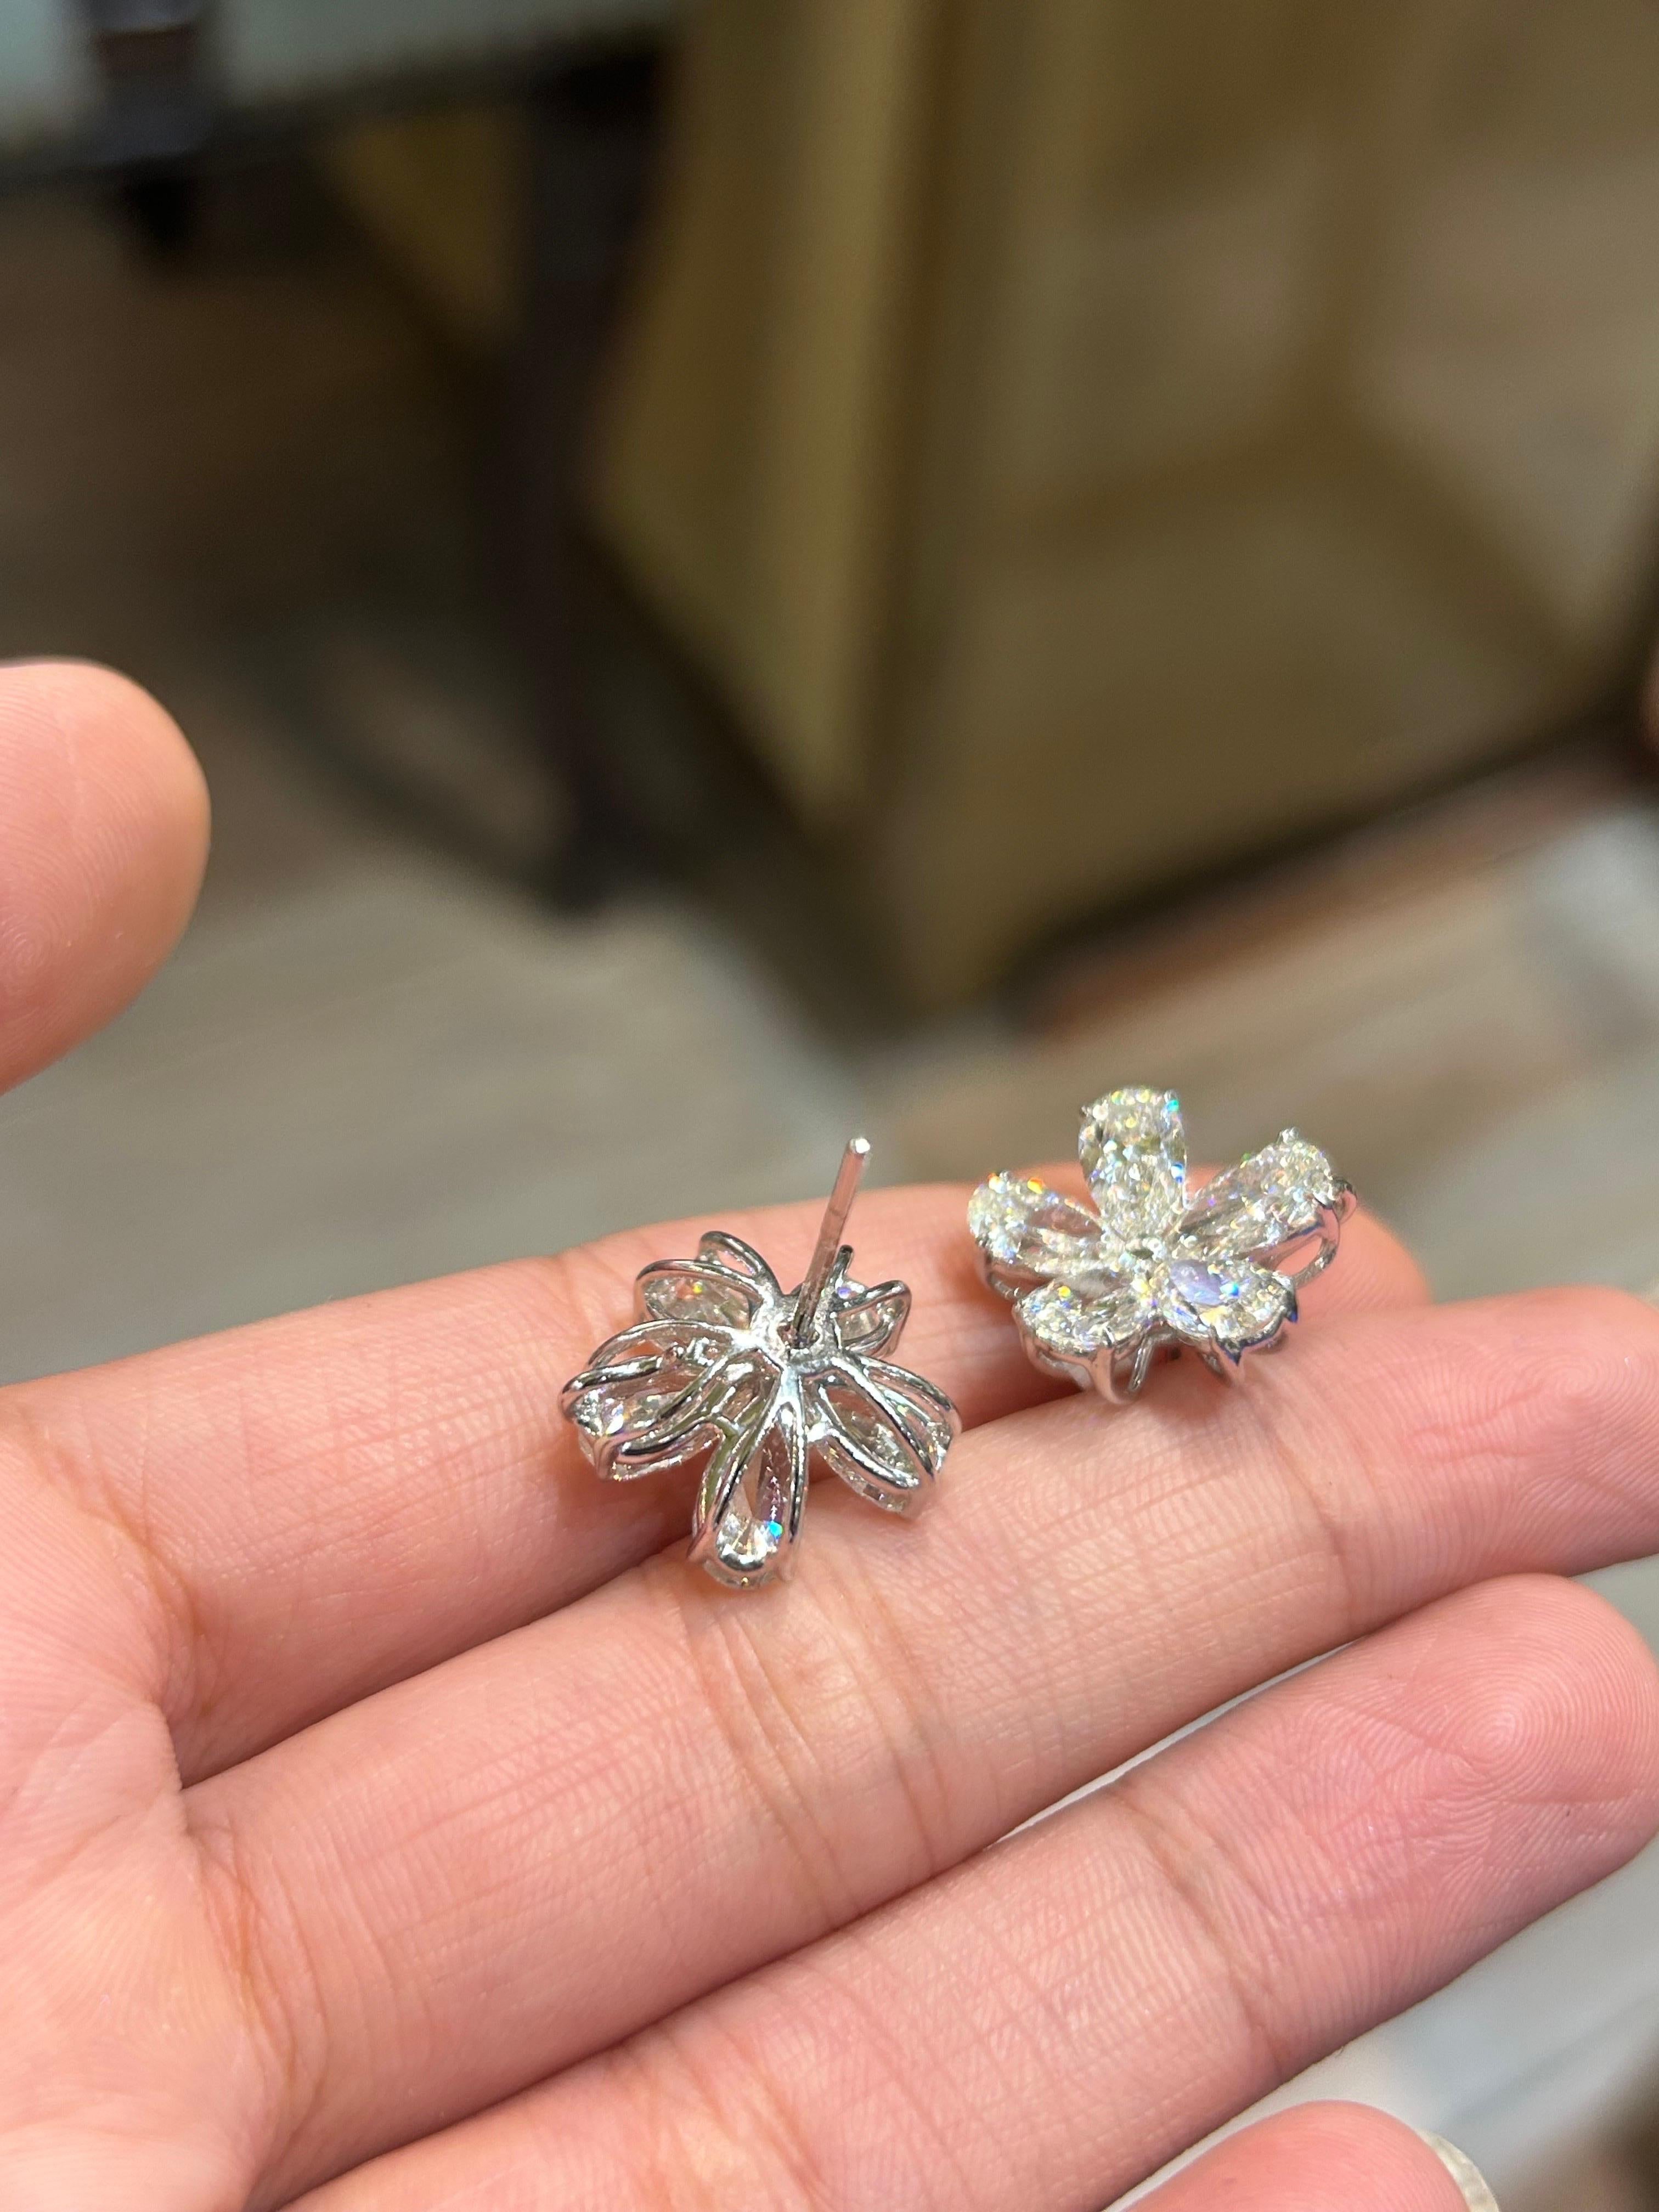 A stunning pair of VVS/VS quality G/H color pear shape diamond earrings, each weighing around 0.7 carats. Set in solid 18K White Gold. Comes with a push-pull backing. 